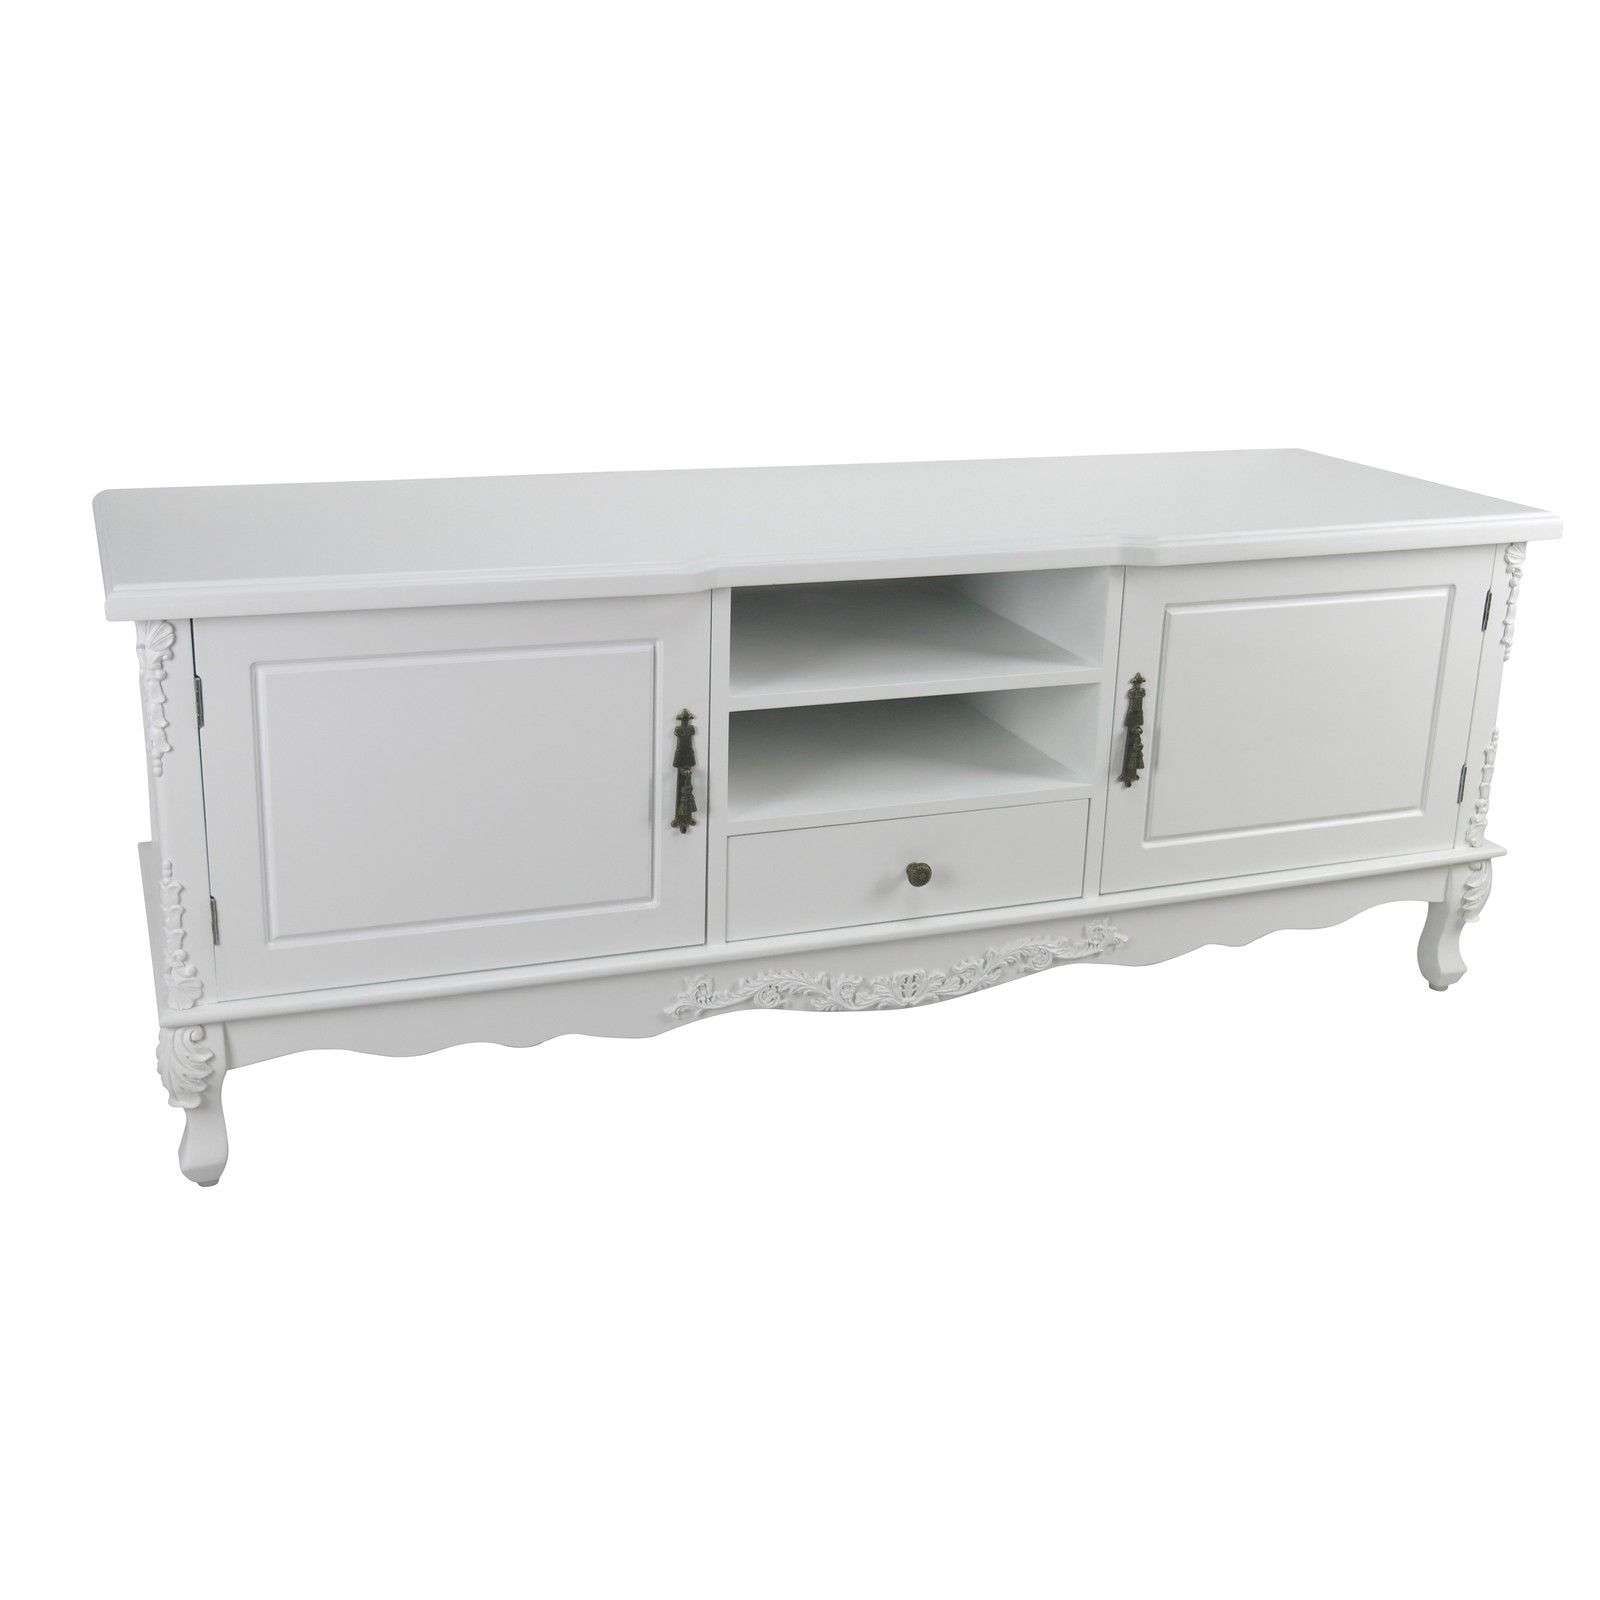 French Style White Large Cabinet Tv Unit Furniture – La Maison Within French Style Tv Cabinets (View 5 of 20)